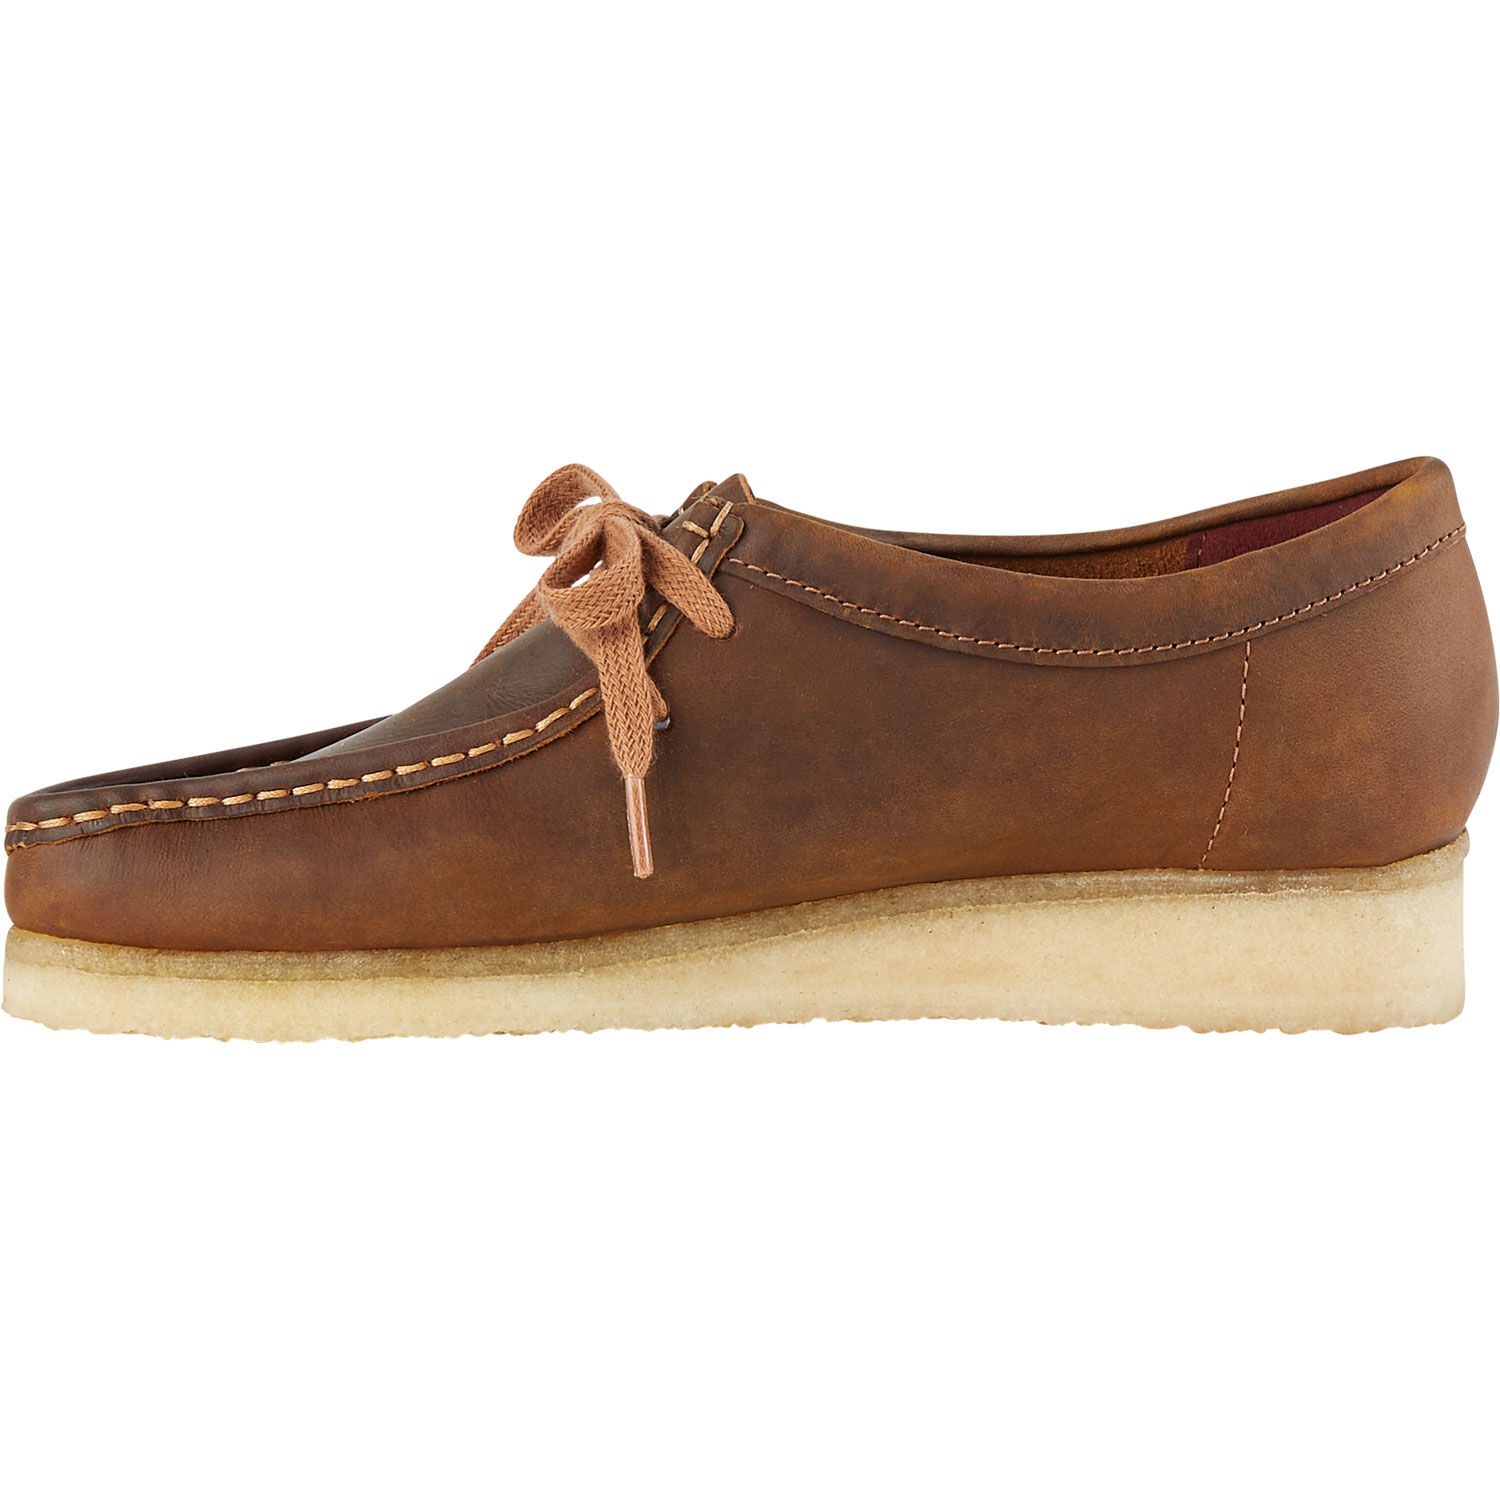 Women's Clarks Wallabee Shoes | Duluth Trading Company